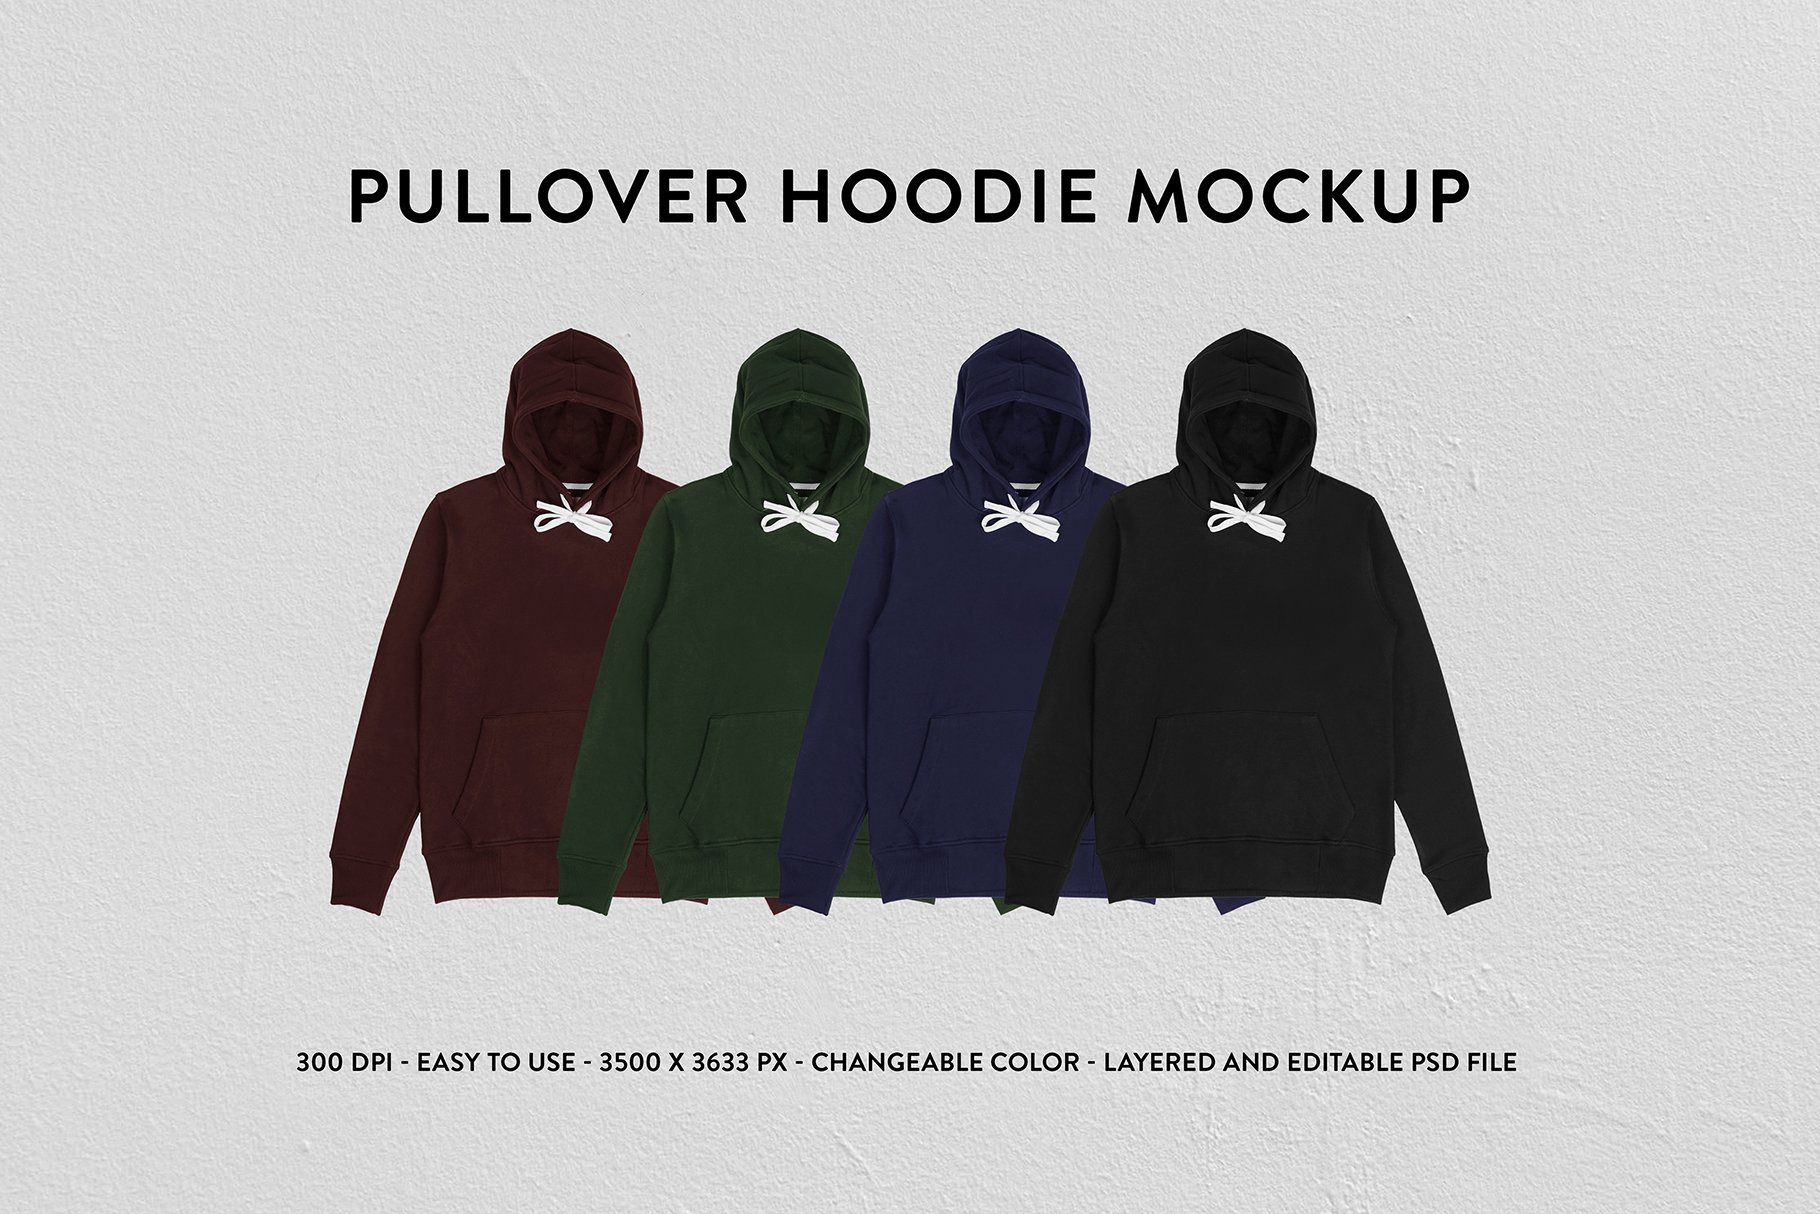 Pullover Hoodie Mockup cover image.